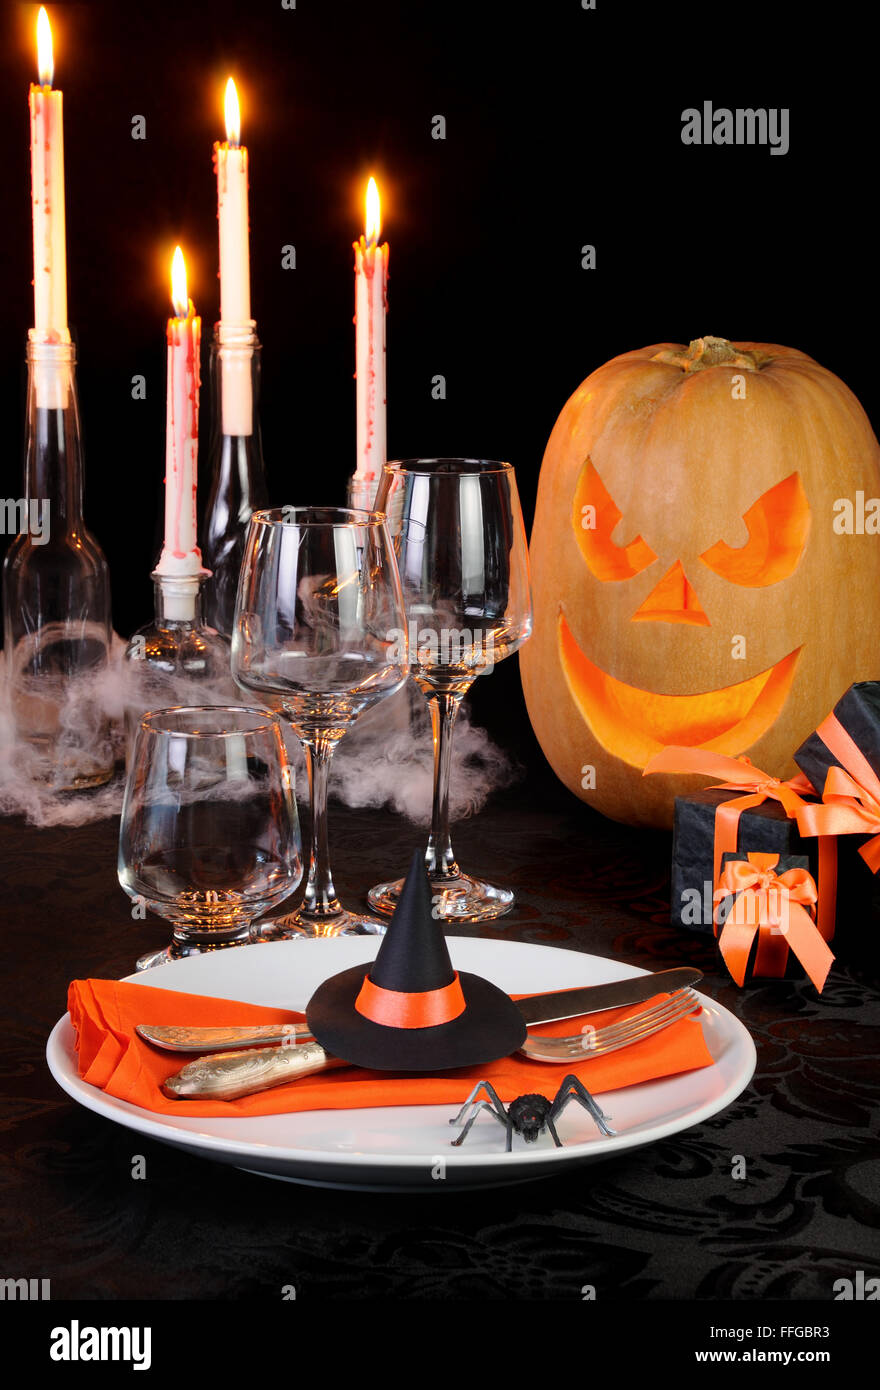 Witch's Hat as a decor element Halloween table setting Stock Photo